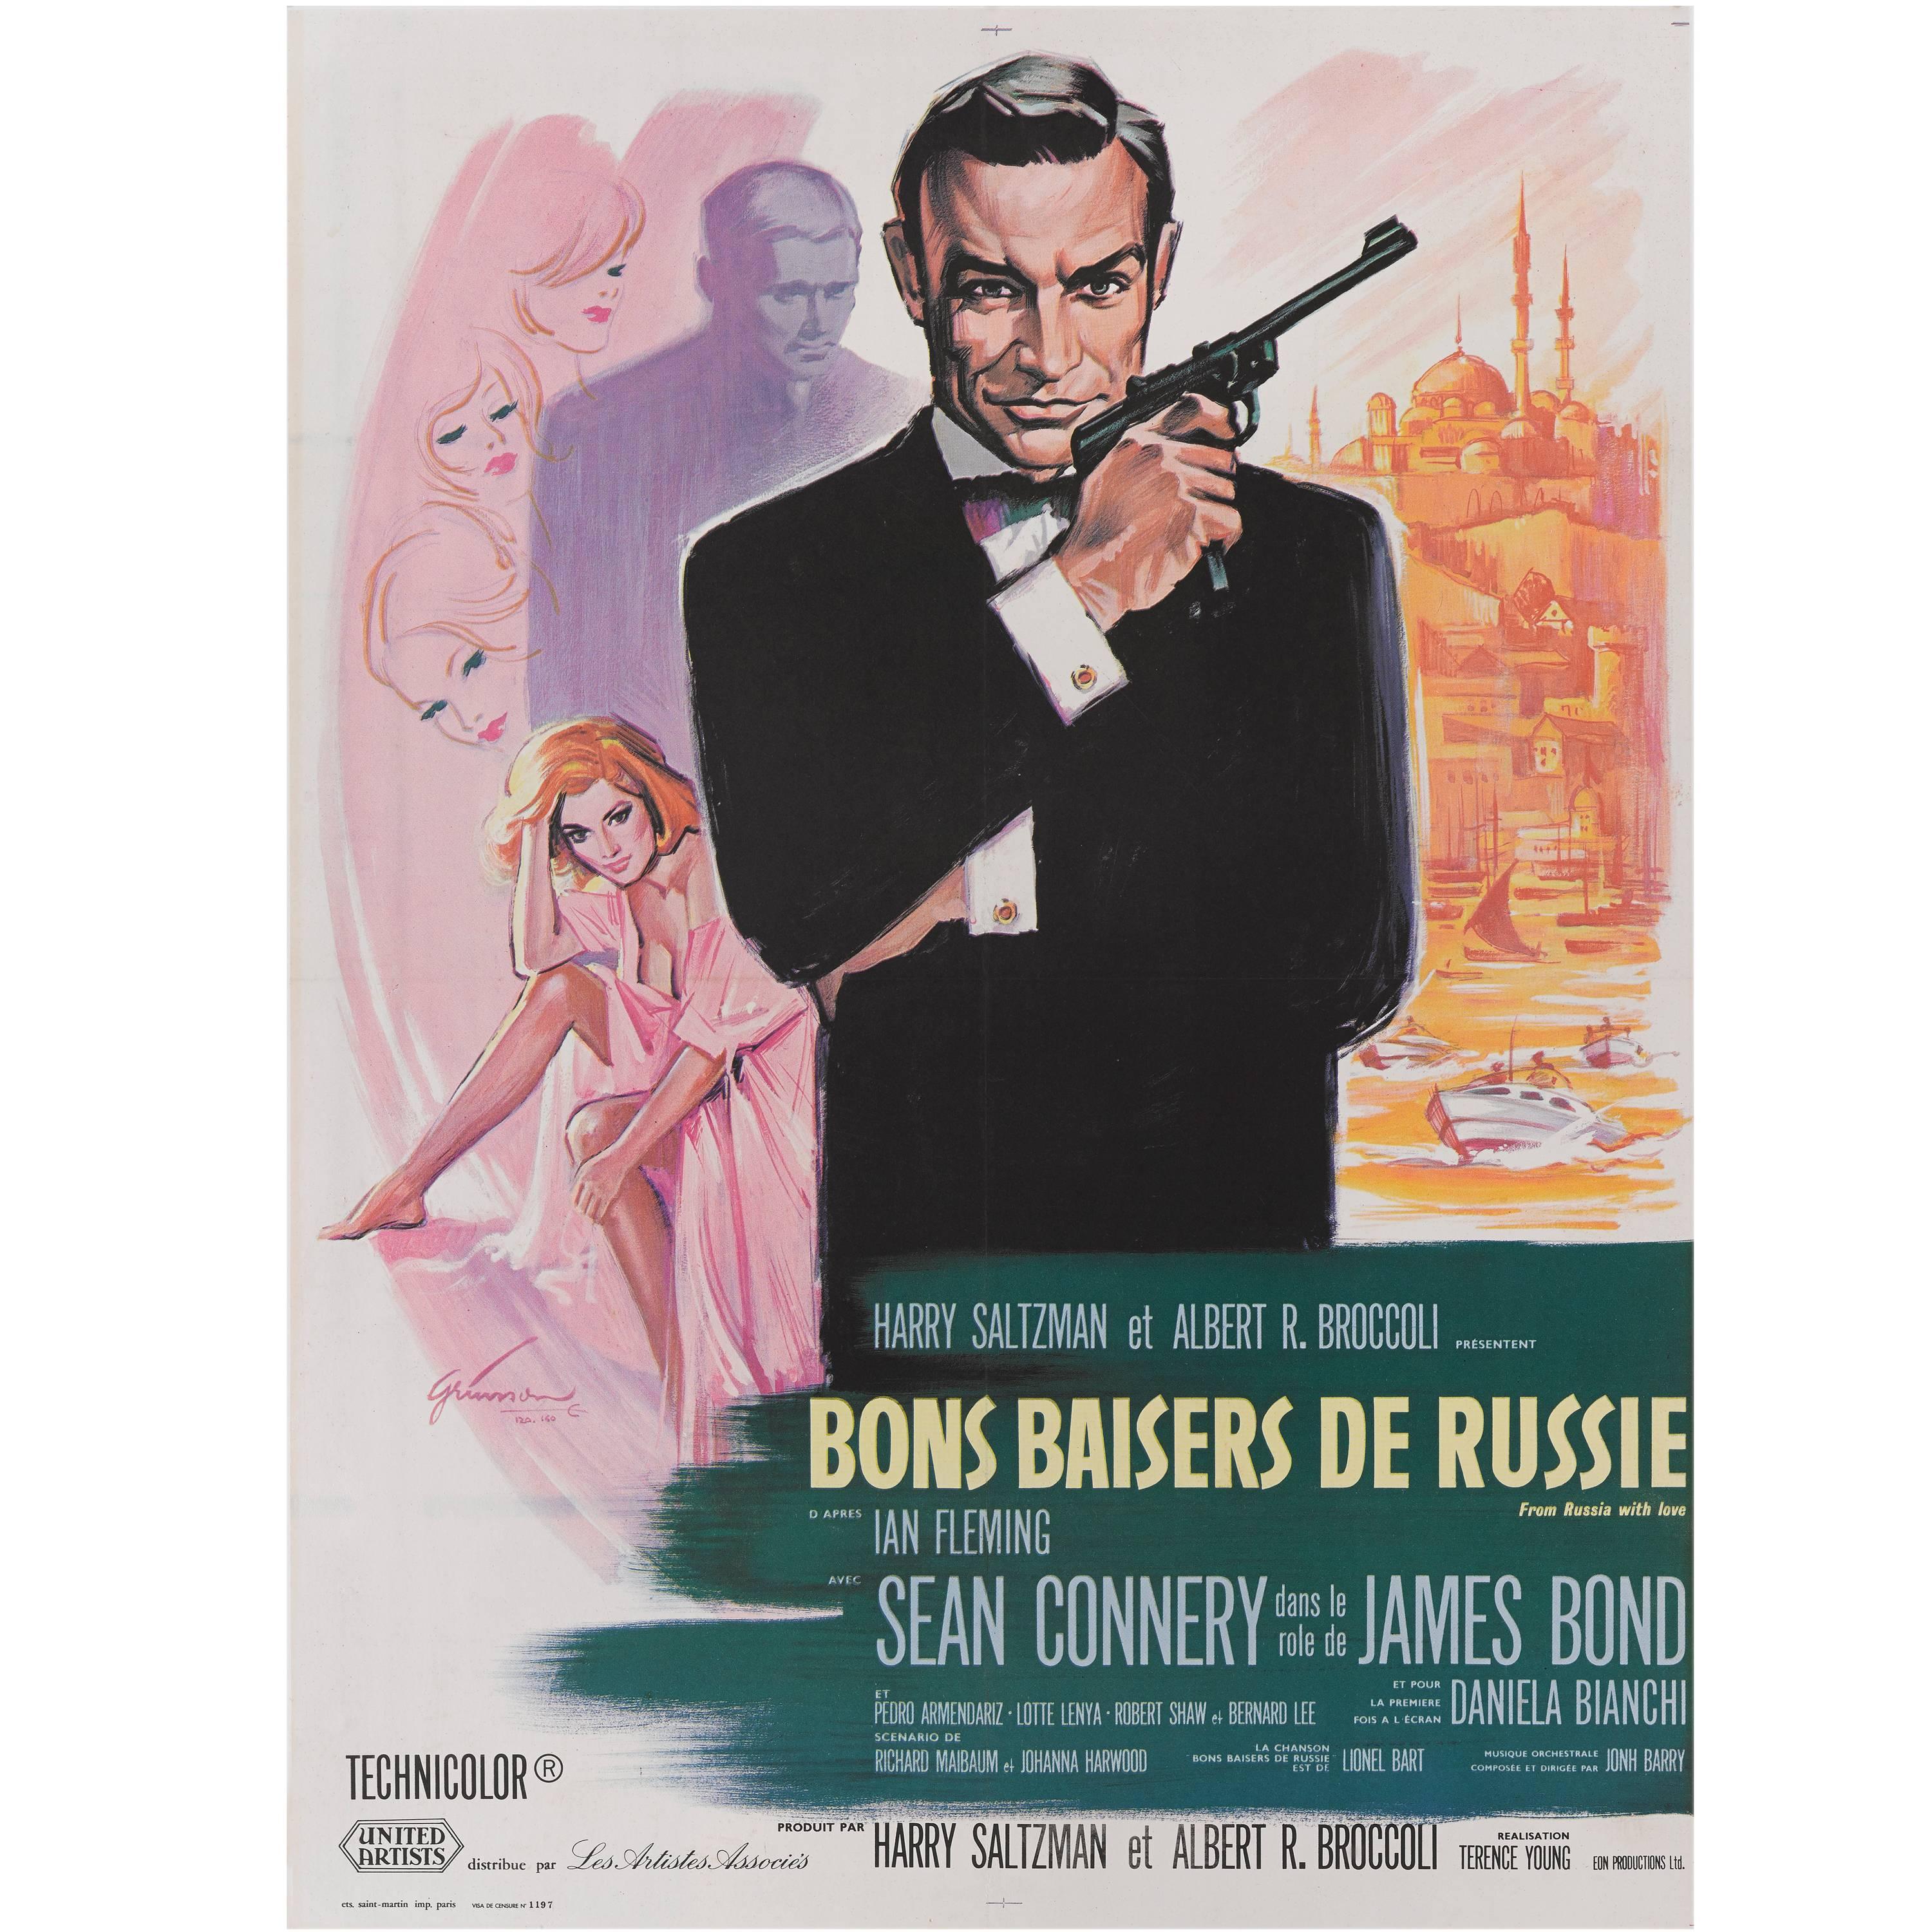 From Russia with Love / Bons Baisers de Russie